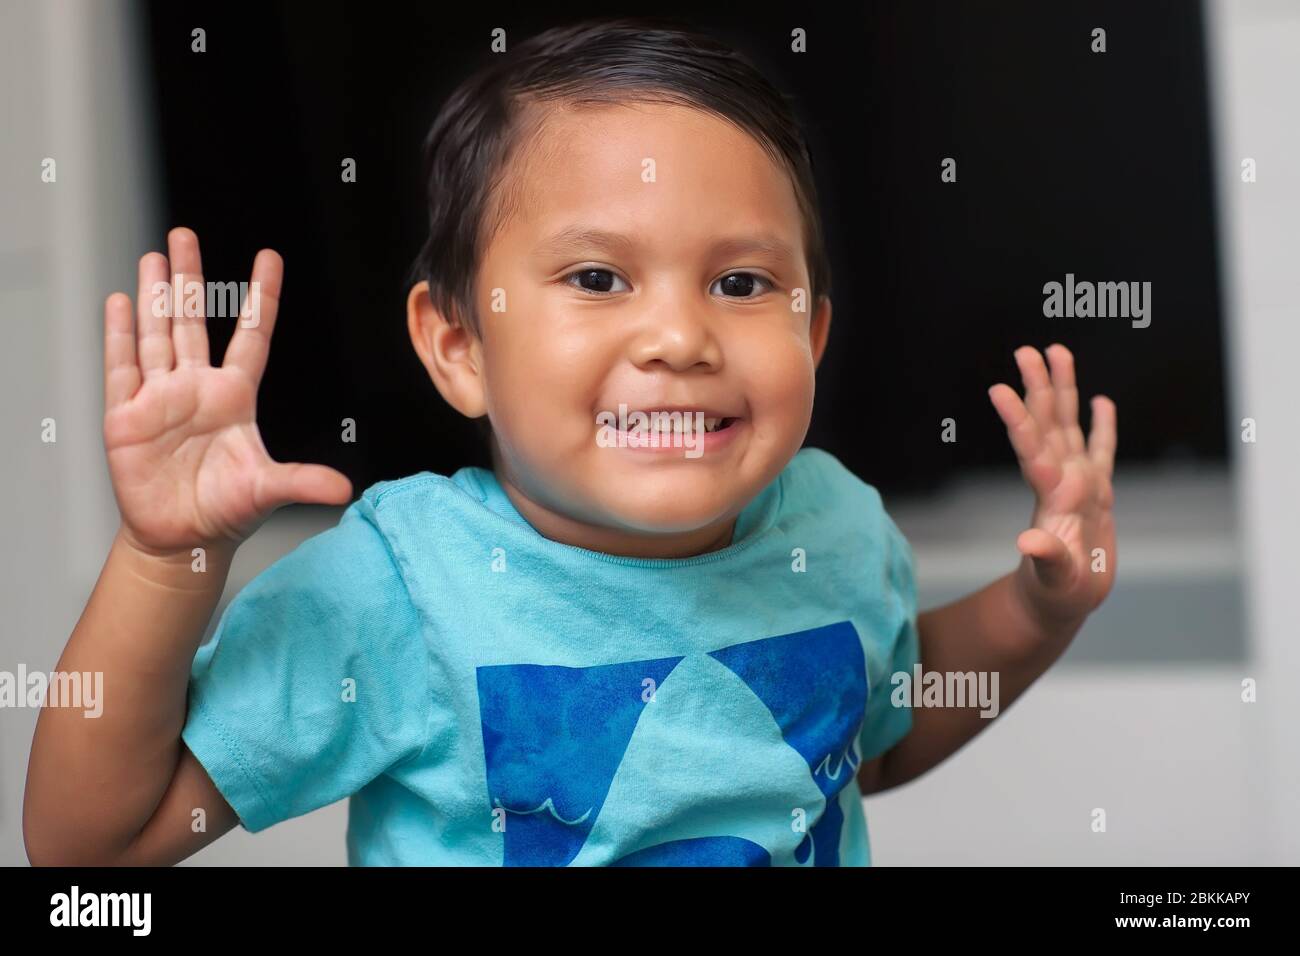 Young boy who is using his hands and fingers while learning to count, age of a  preschooler and raising both hands up while smiling. Stock Photo